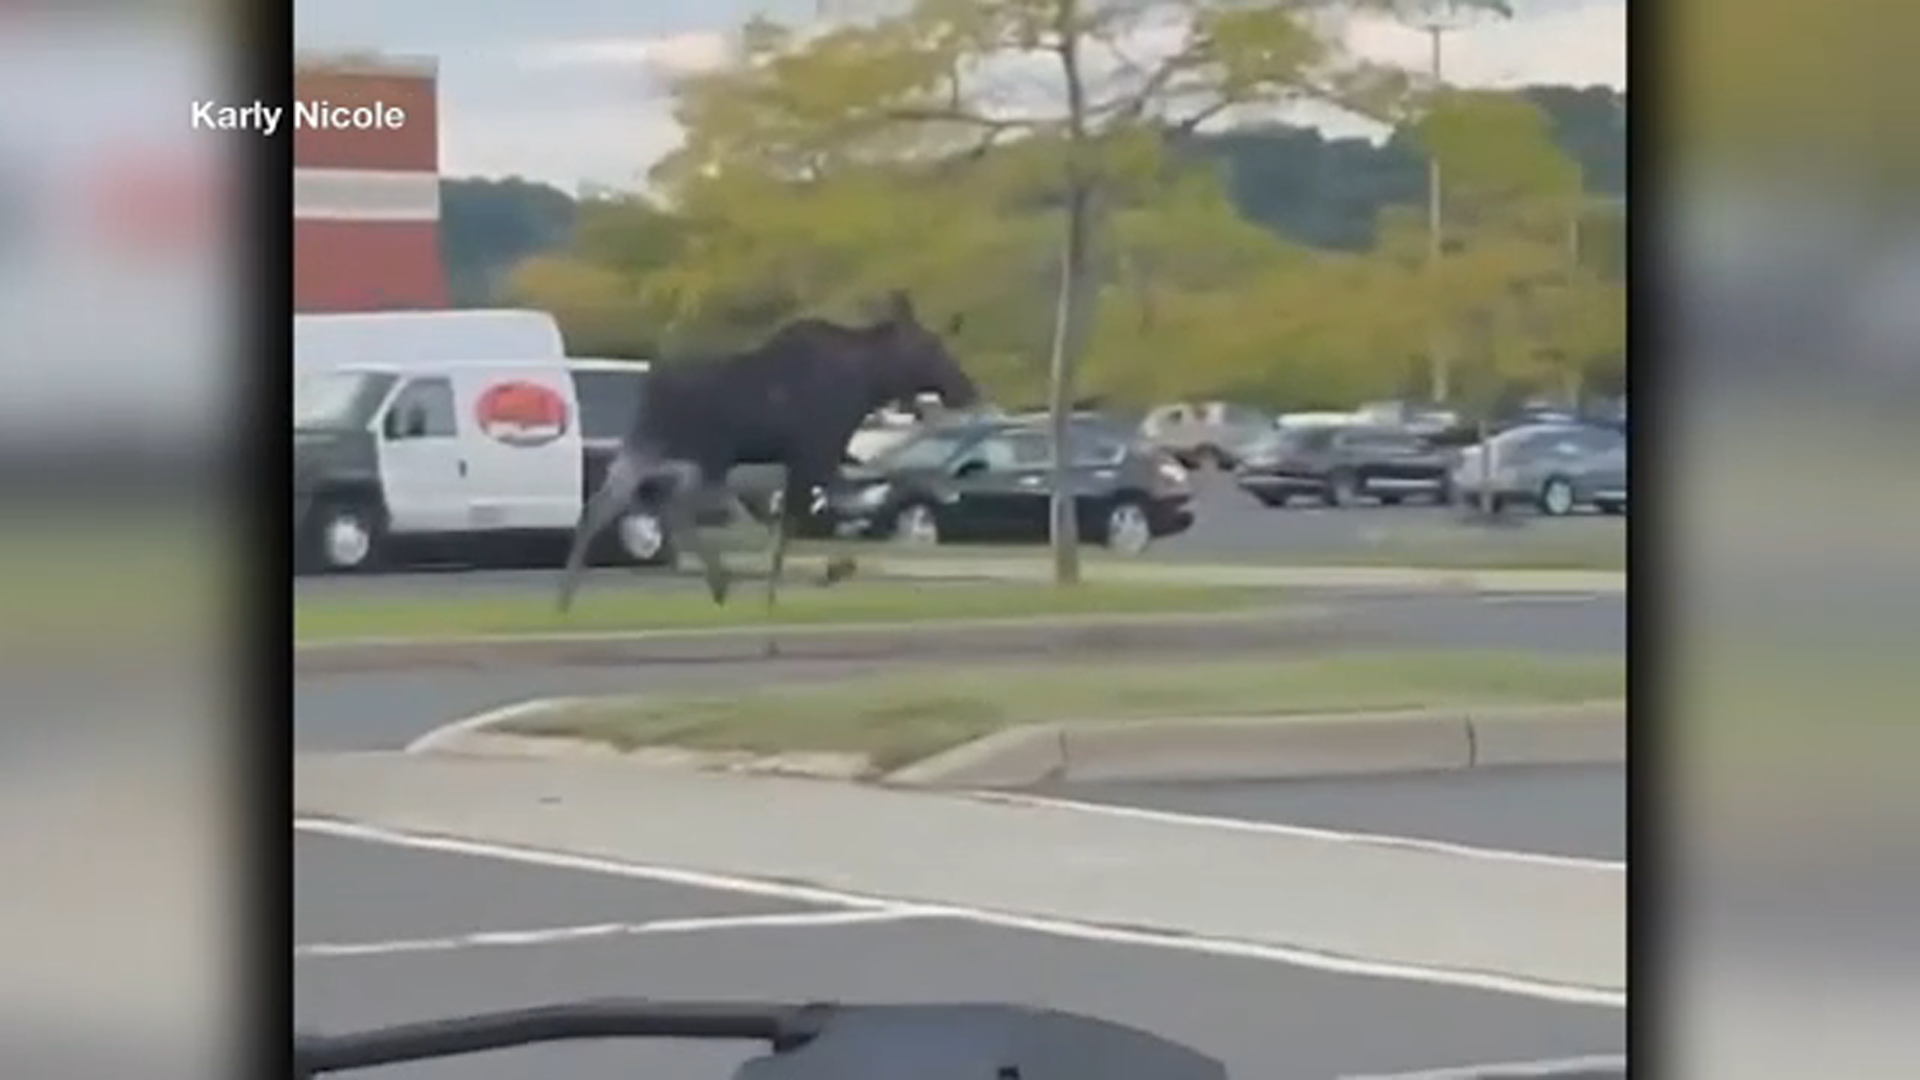 Video shows moose on the loose in Connecticut parking lot